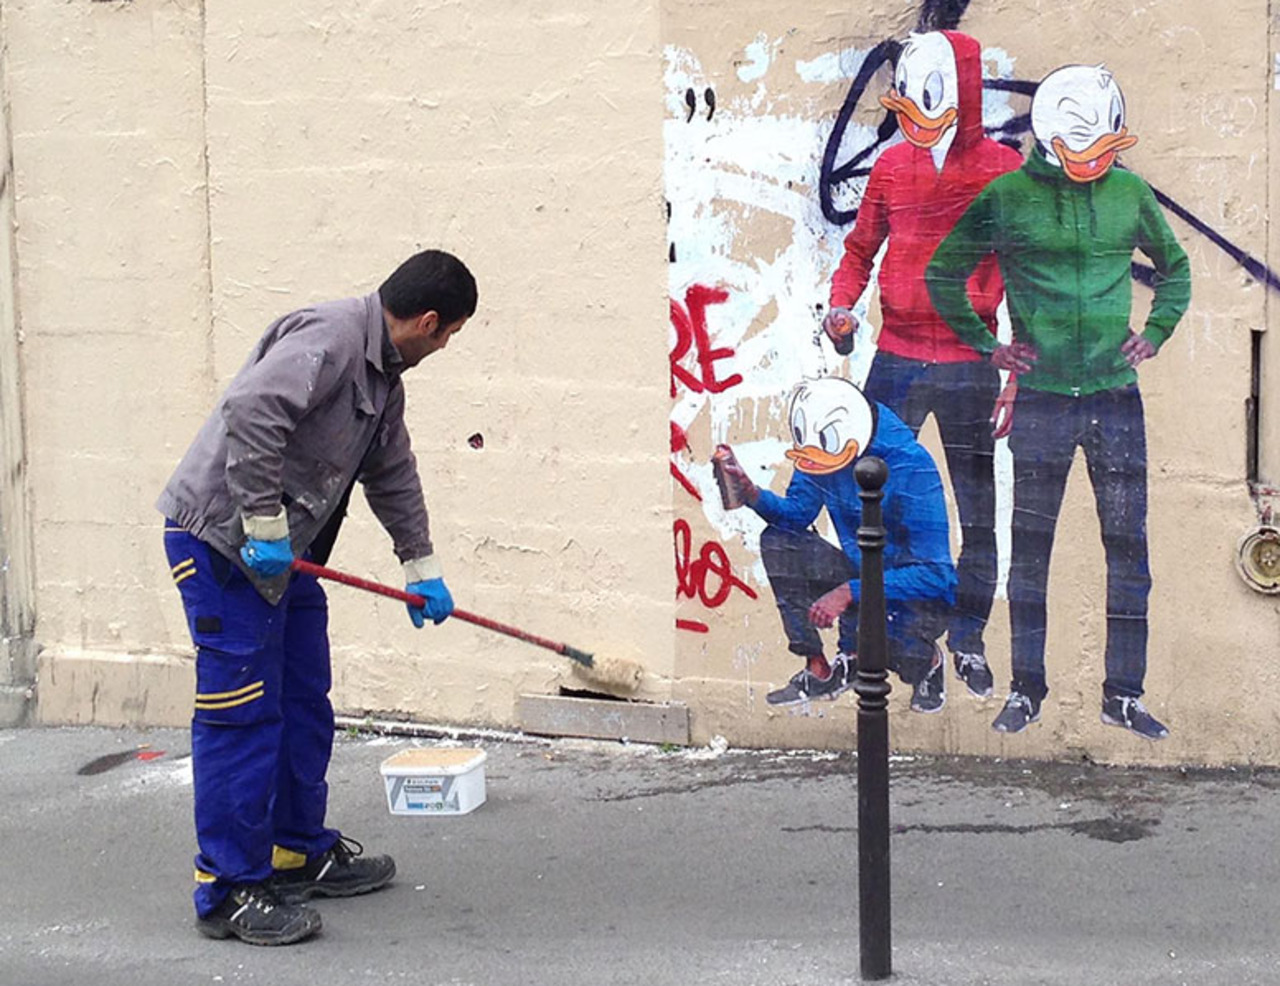 LinuxGal: RT _inkster_: This is too #funny! #Graffiti removal guy gets turned into #streetart in #Paris … http://t.co/dXZxoqziwI